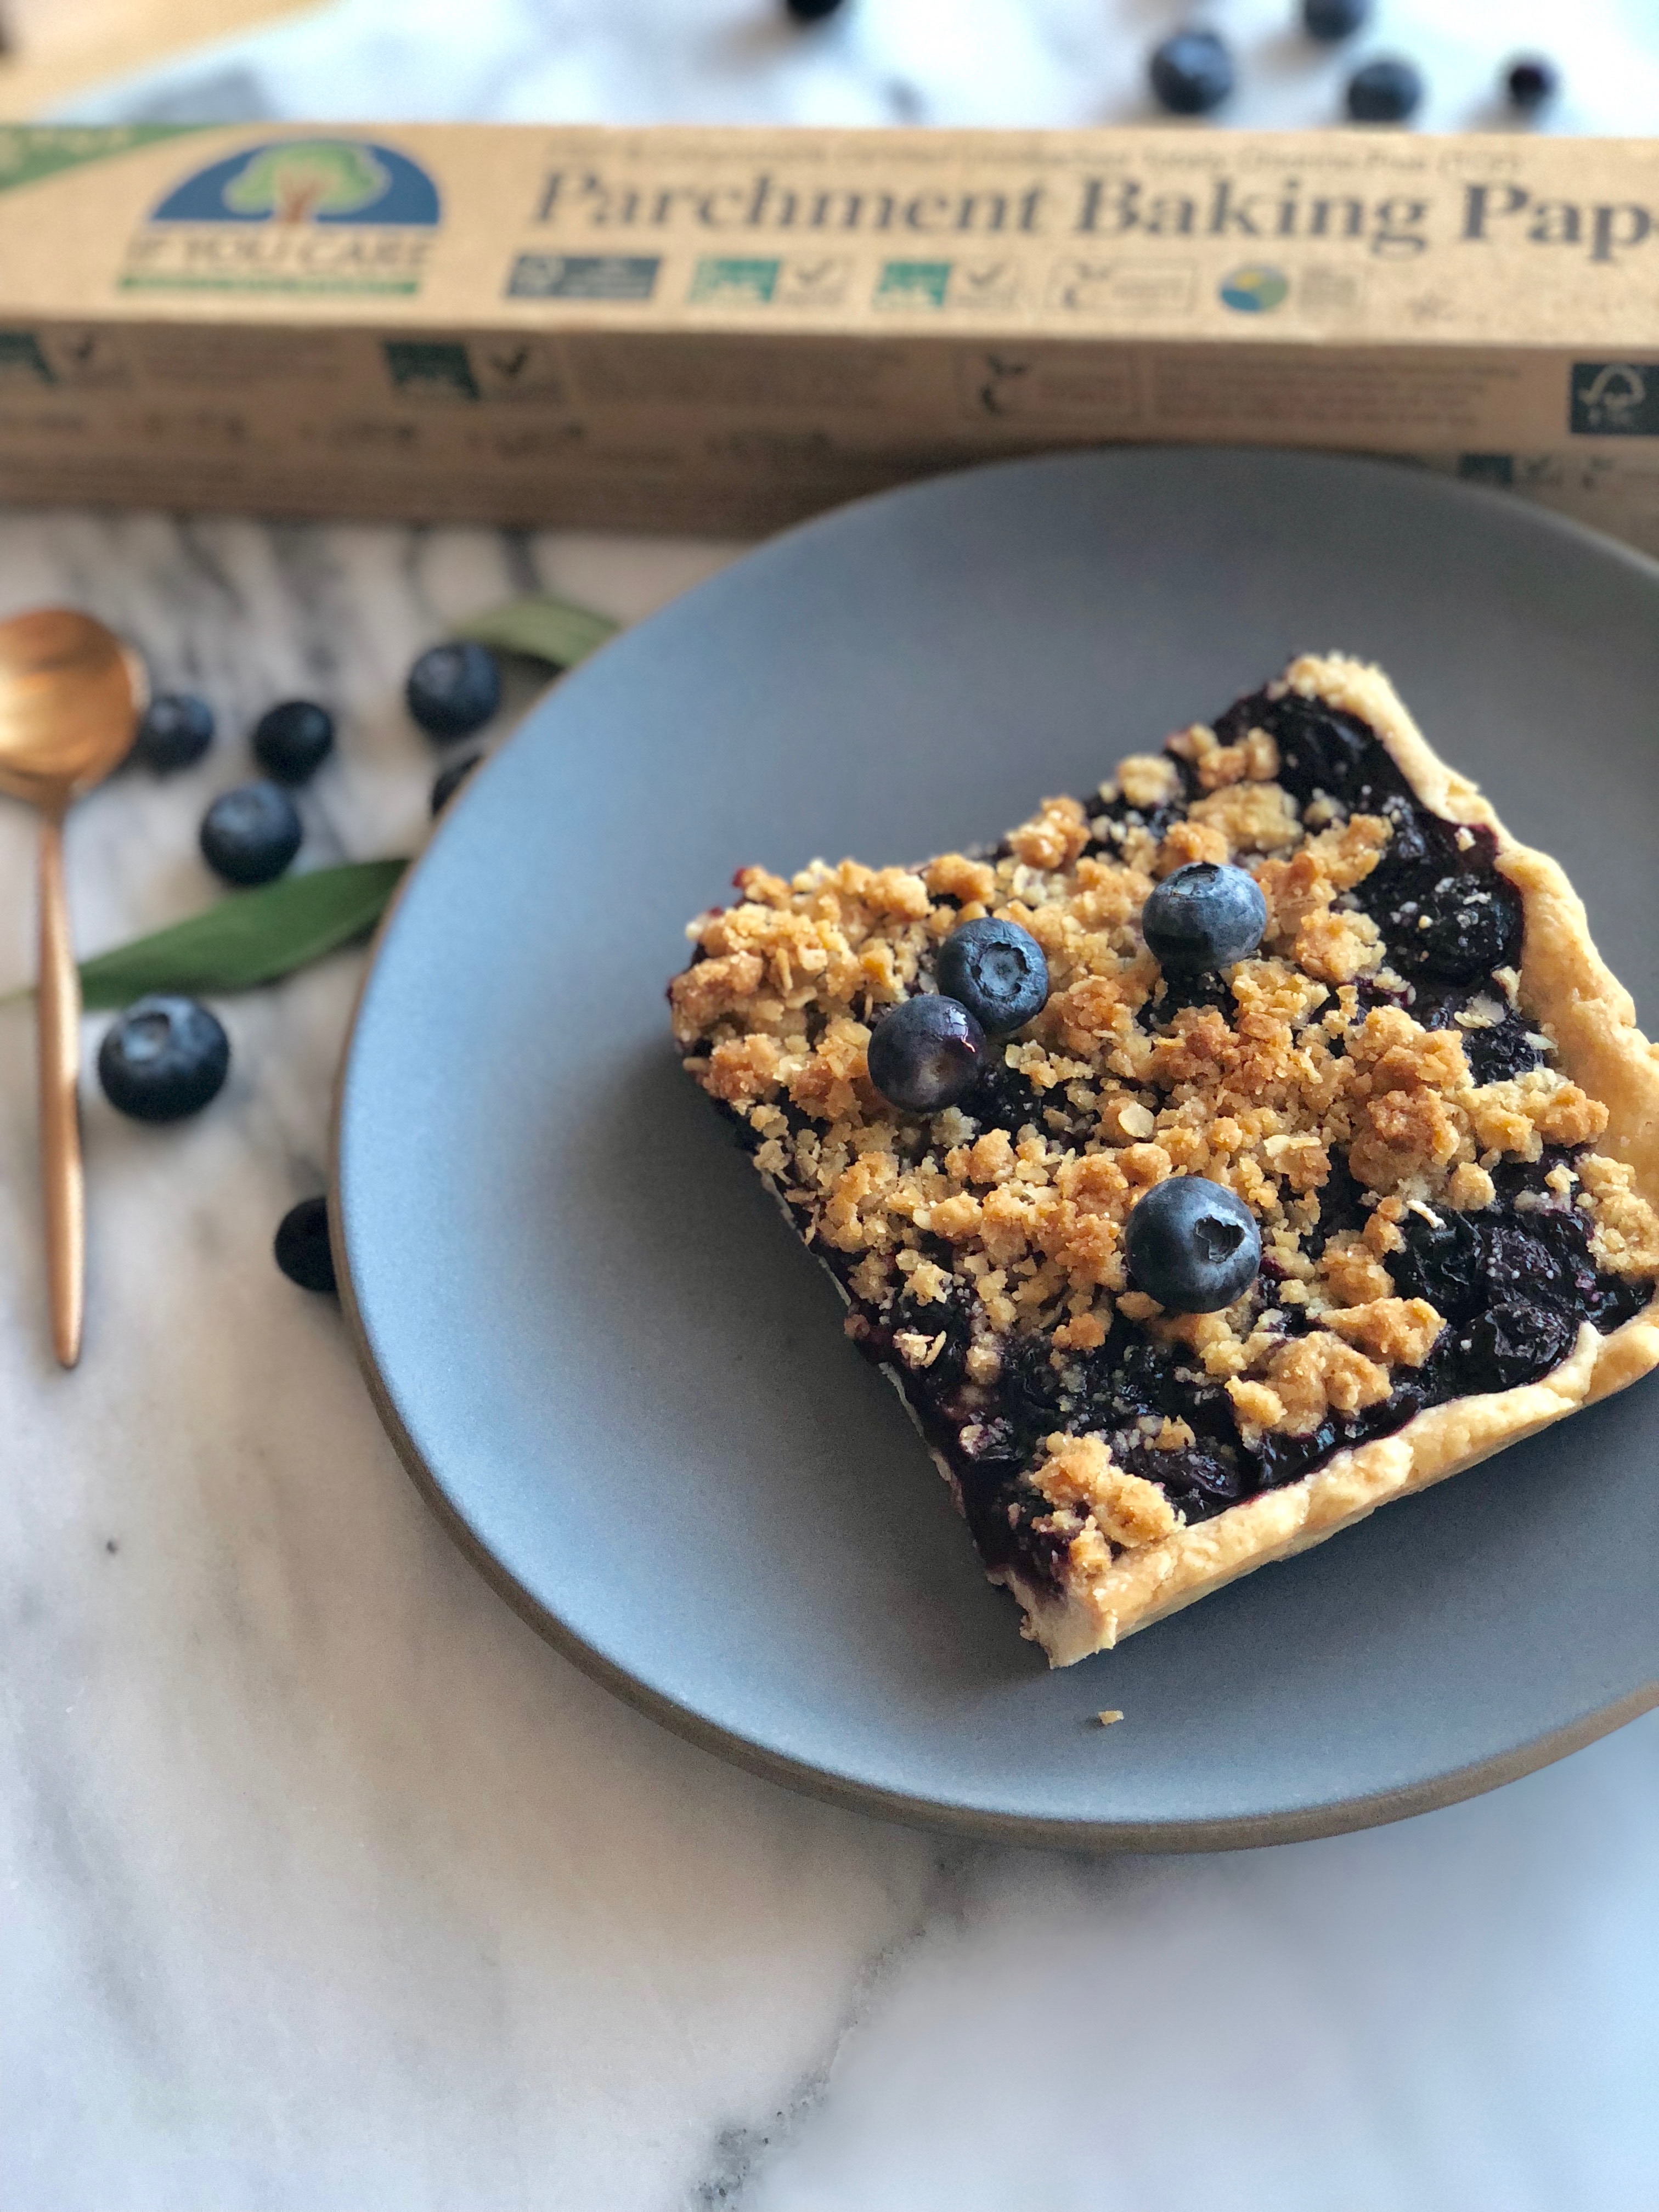 This Blueberry & Sage Sheet Pie from @IfYouCareProducts unites sweet, tangy fresh blueberries with the subtle savory flavor of sage and it’s topped with a deliciously crunchy and sweet crumble.